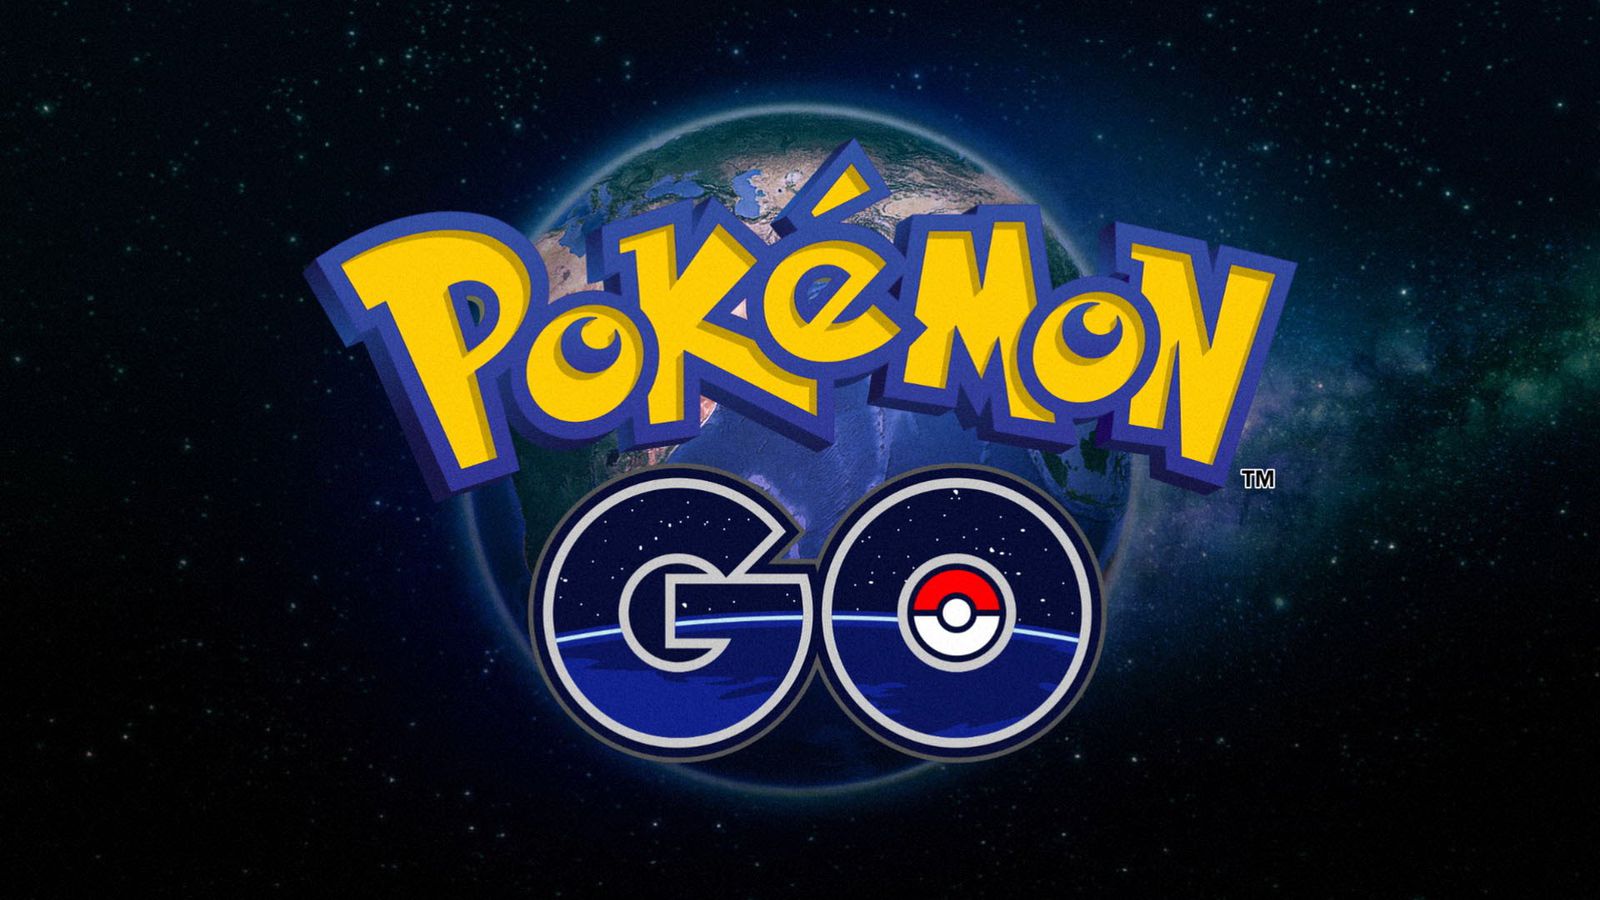 From Google Maps to Pokémon Go, John Hanke is programming the future, Games